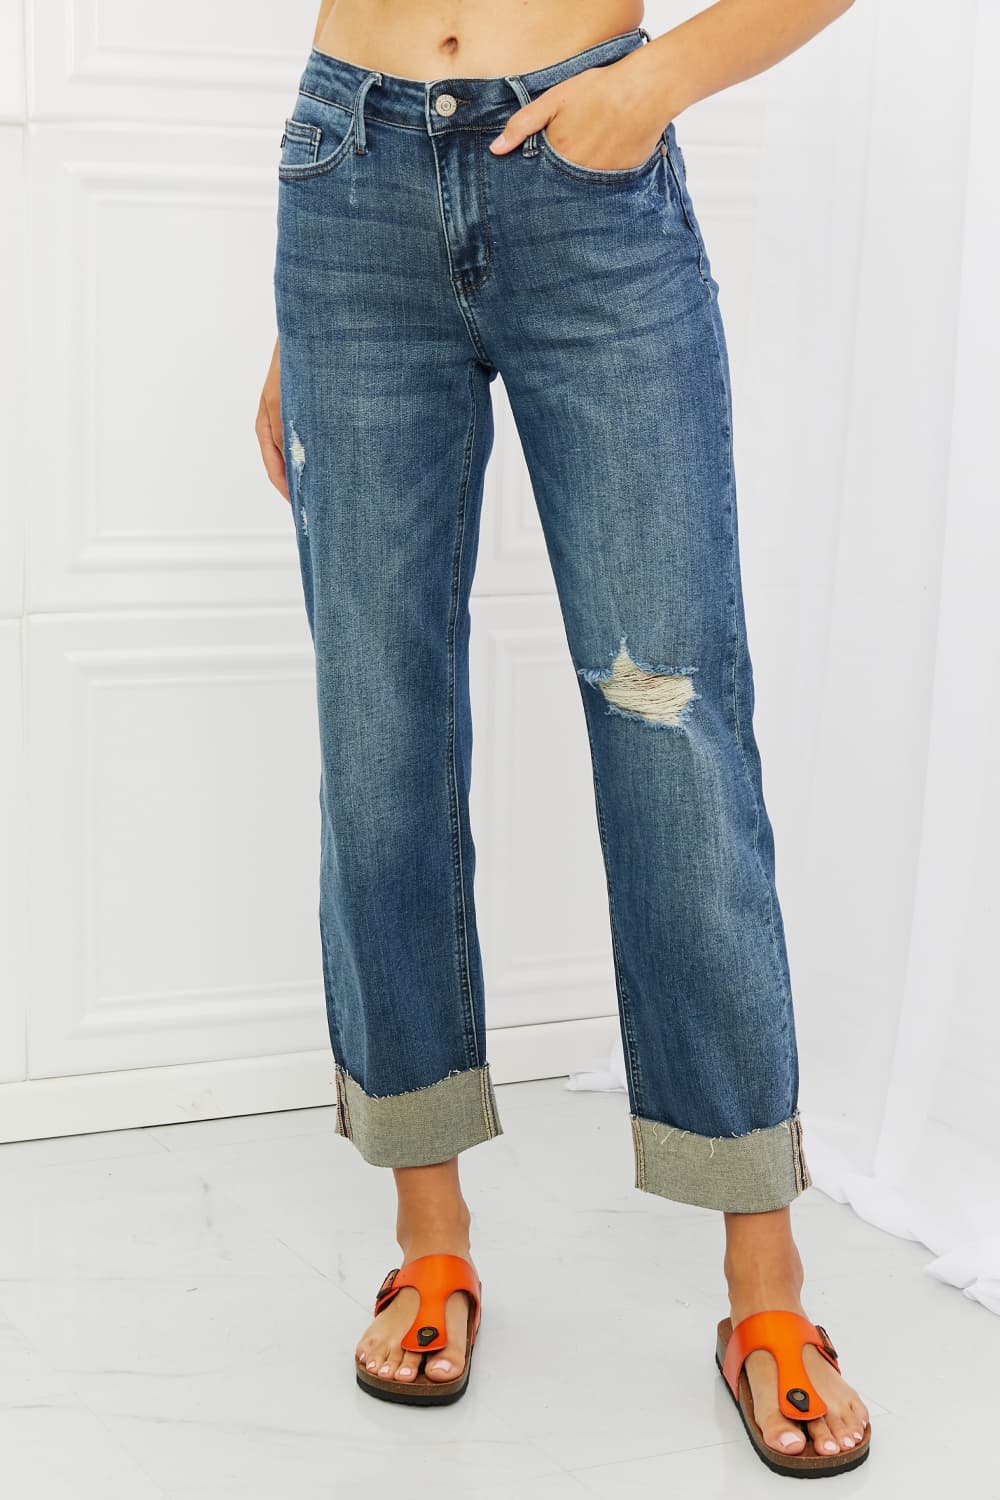 Judy Blue Michelle Full Size Straight Dad Jeans - Cheeky Chic Boutique